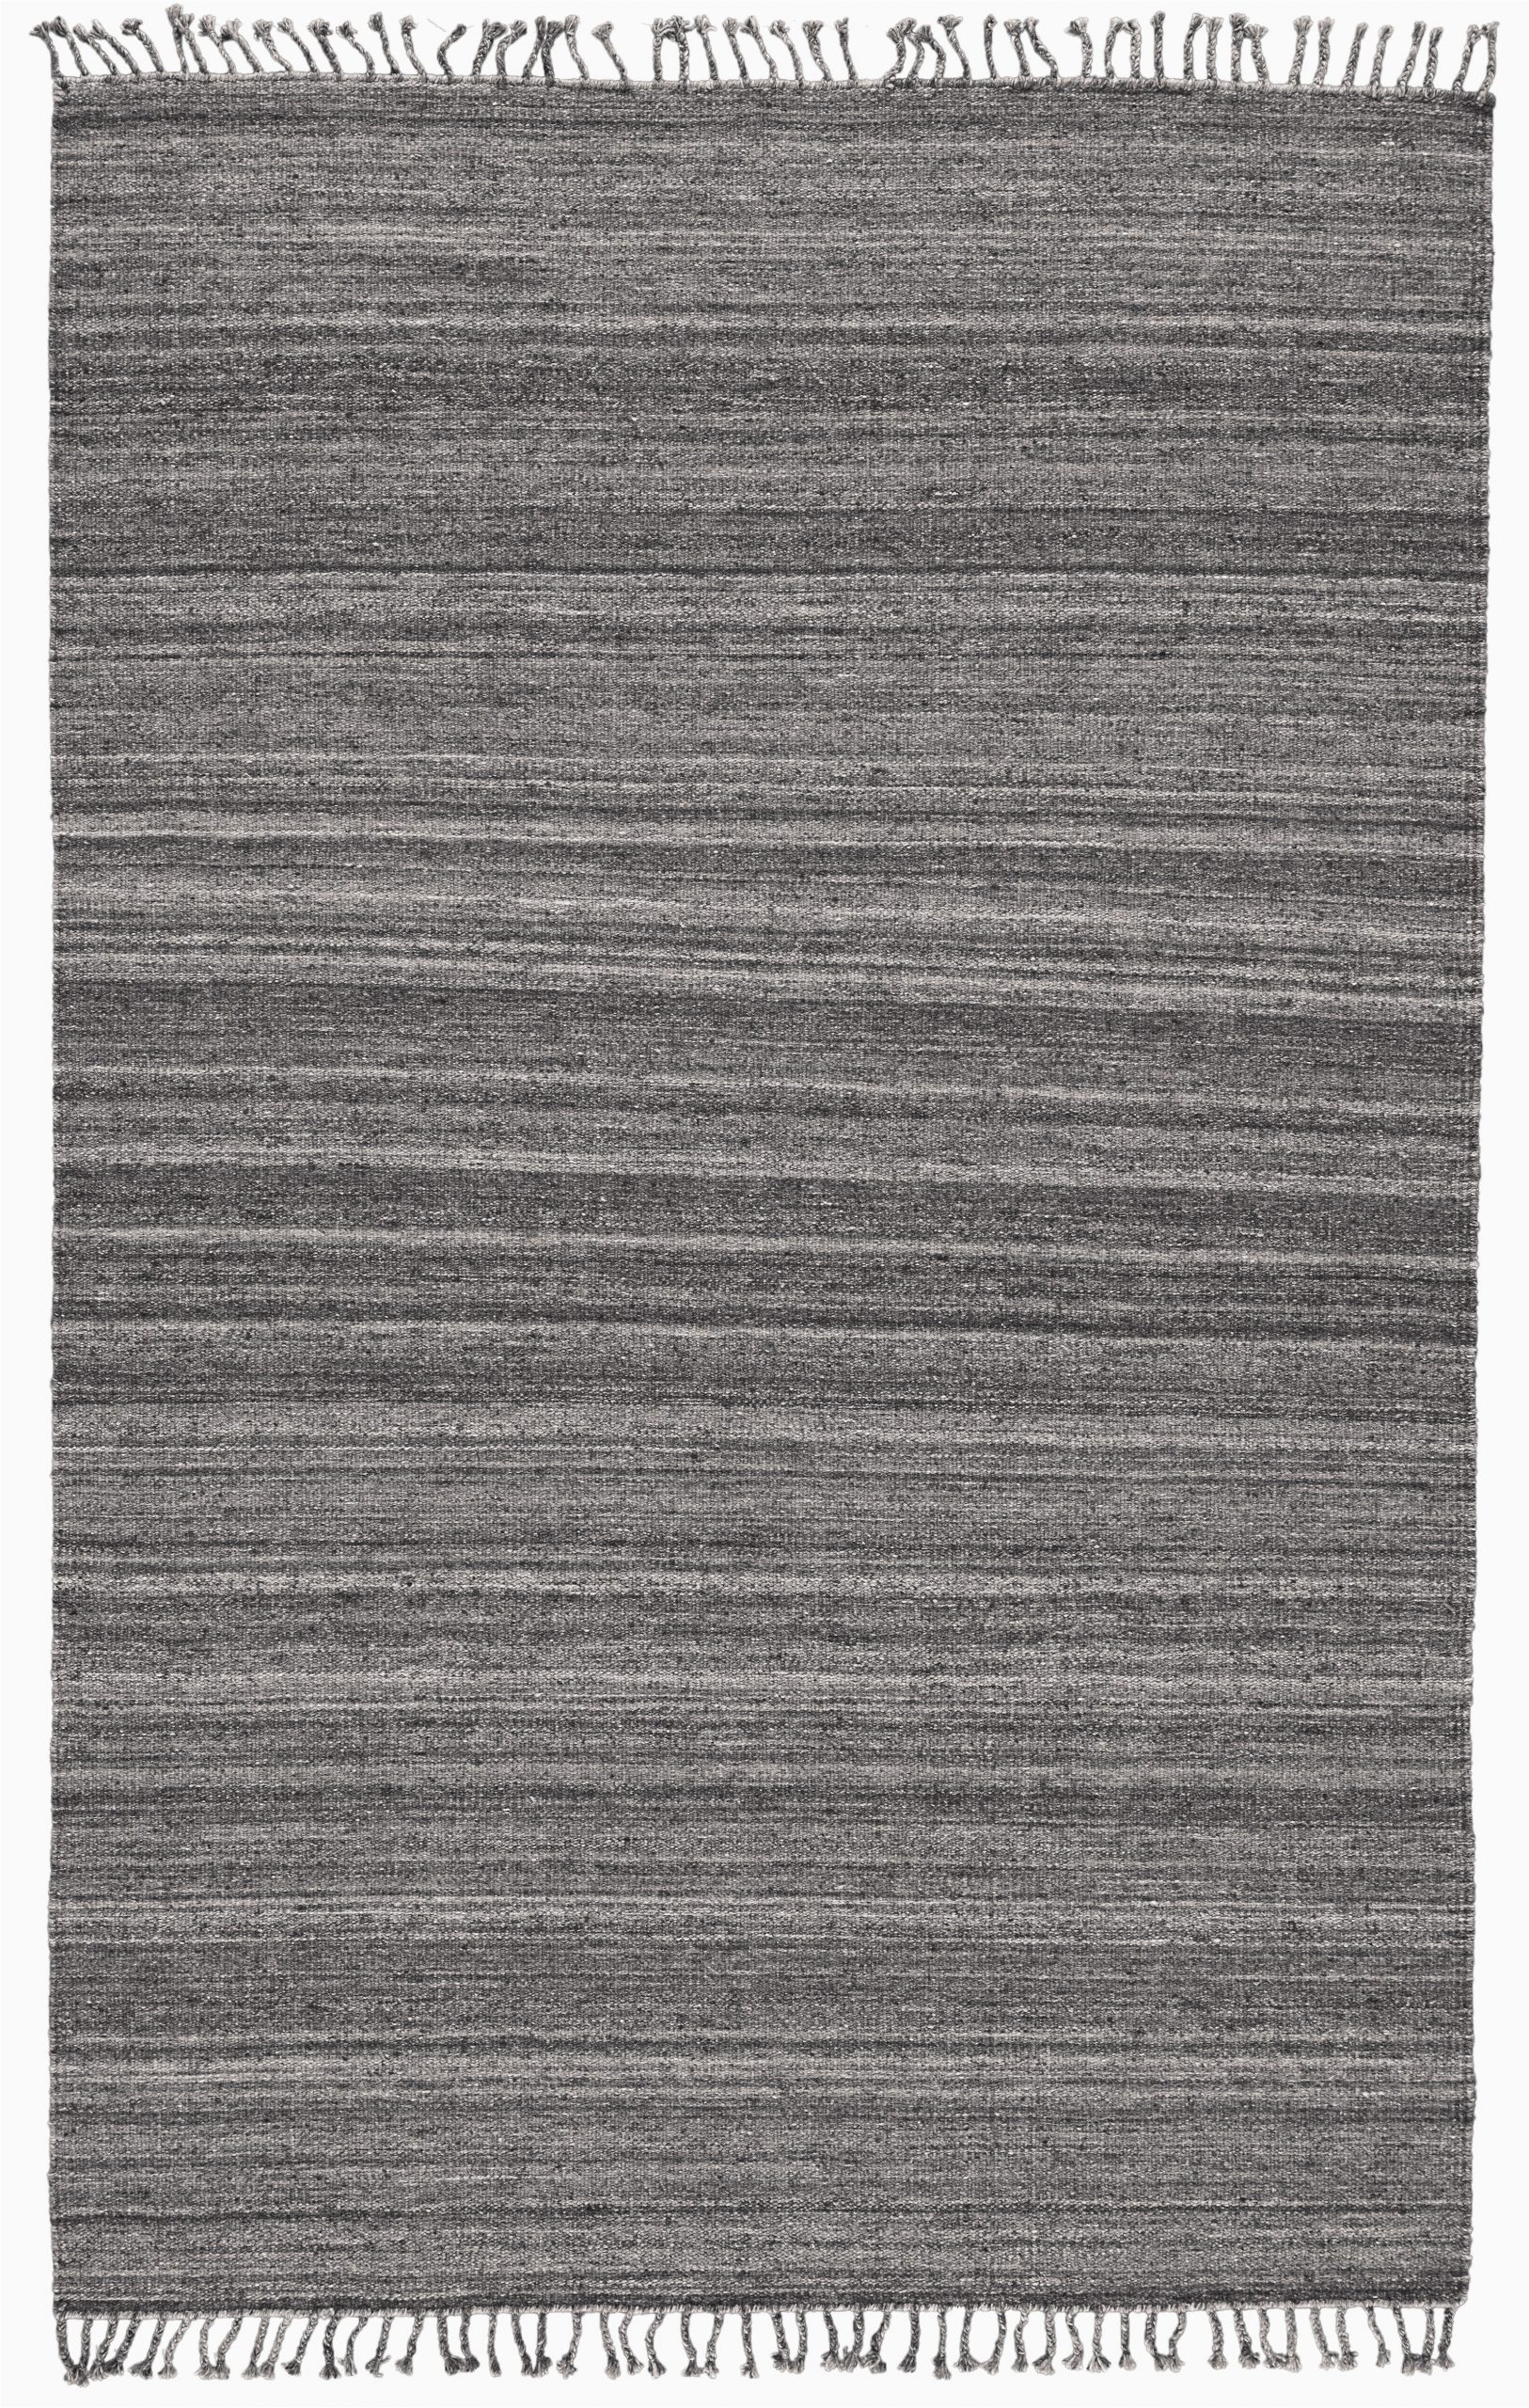 Gray and White Striped area Rug Mcmurtry Striped Handmade Flatweave Wool Gray area Rug